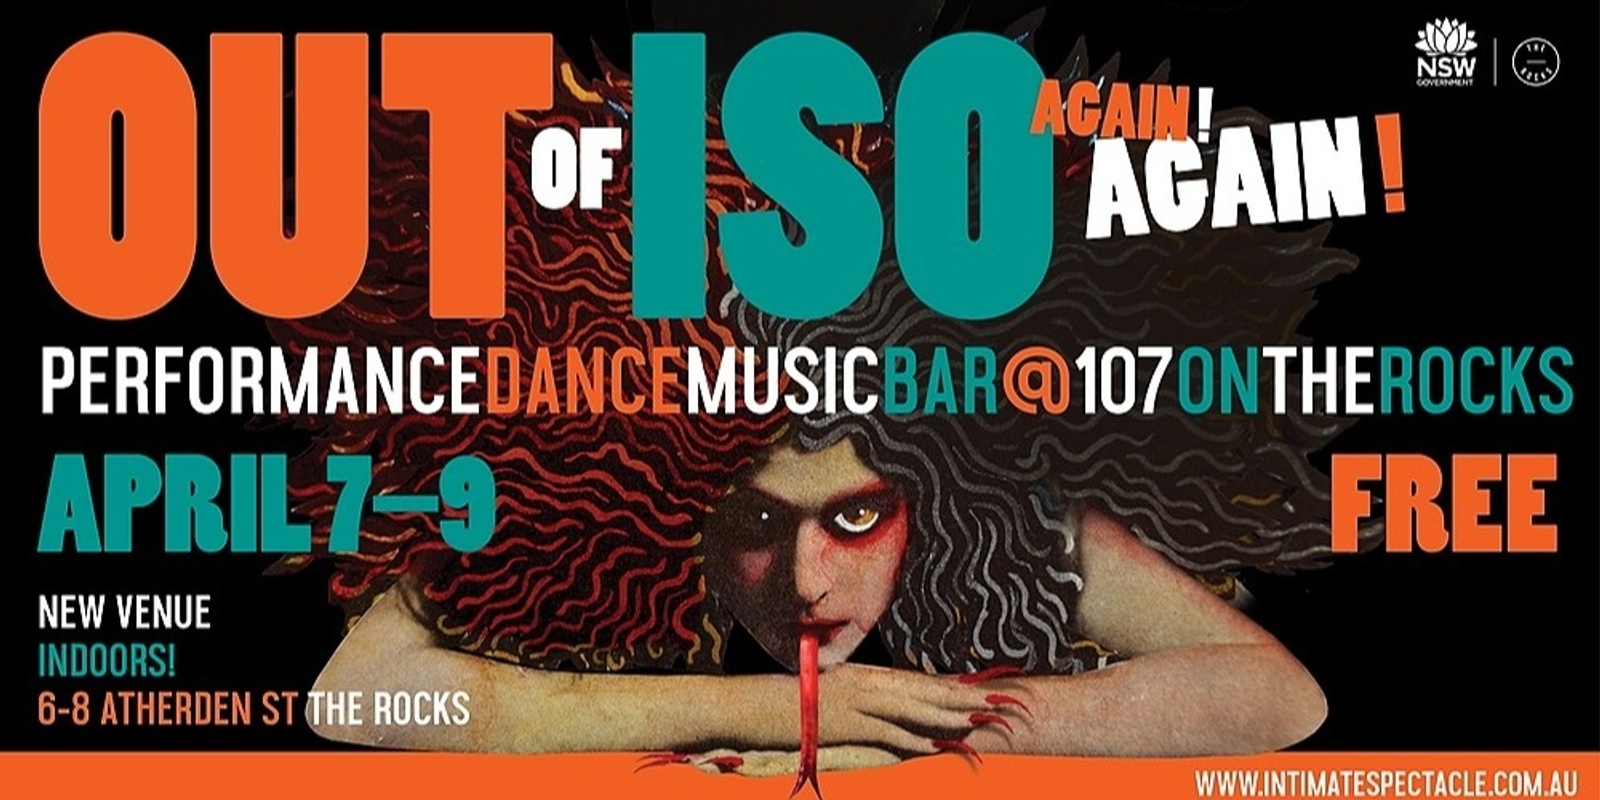 Banner image for Out Of Iso (Again!) by Intimate Spectacle @ 107 on The Rocks